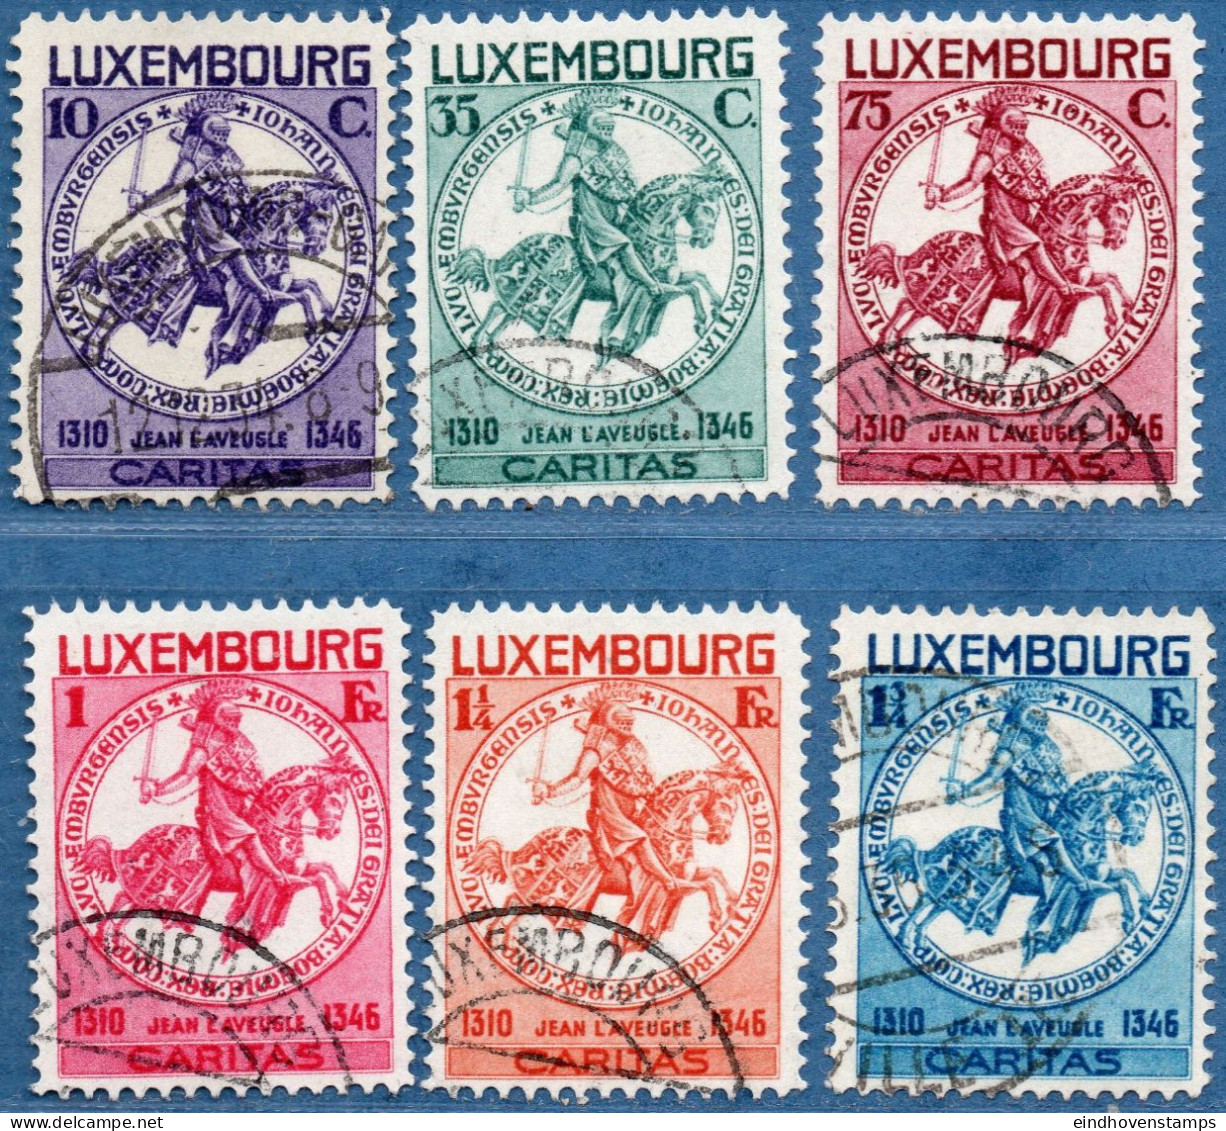 Luxemburg 1934 Caritas Stamps Seal Of Count John The Blind Of Luxemburg 6 Values Cancelled - Oblitérés